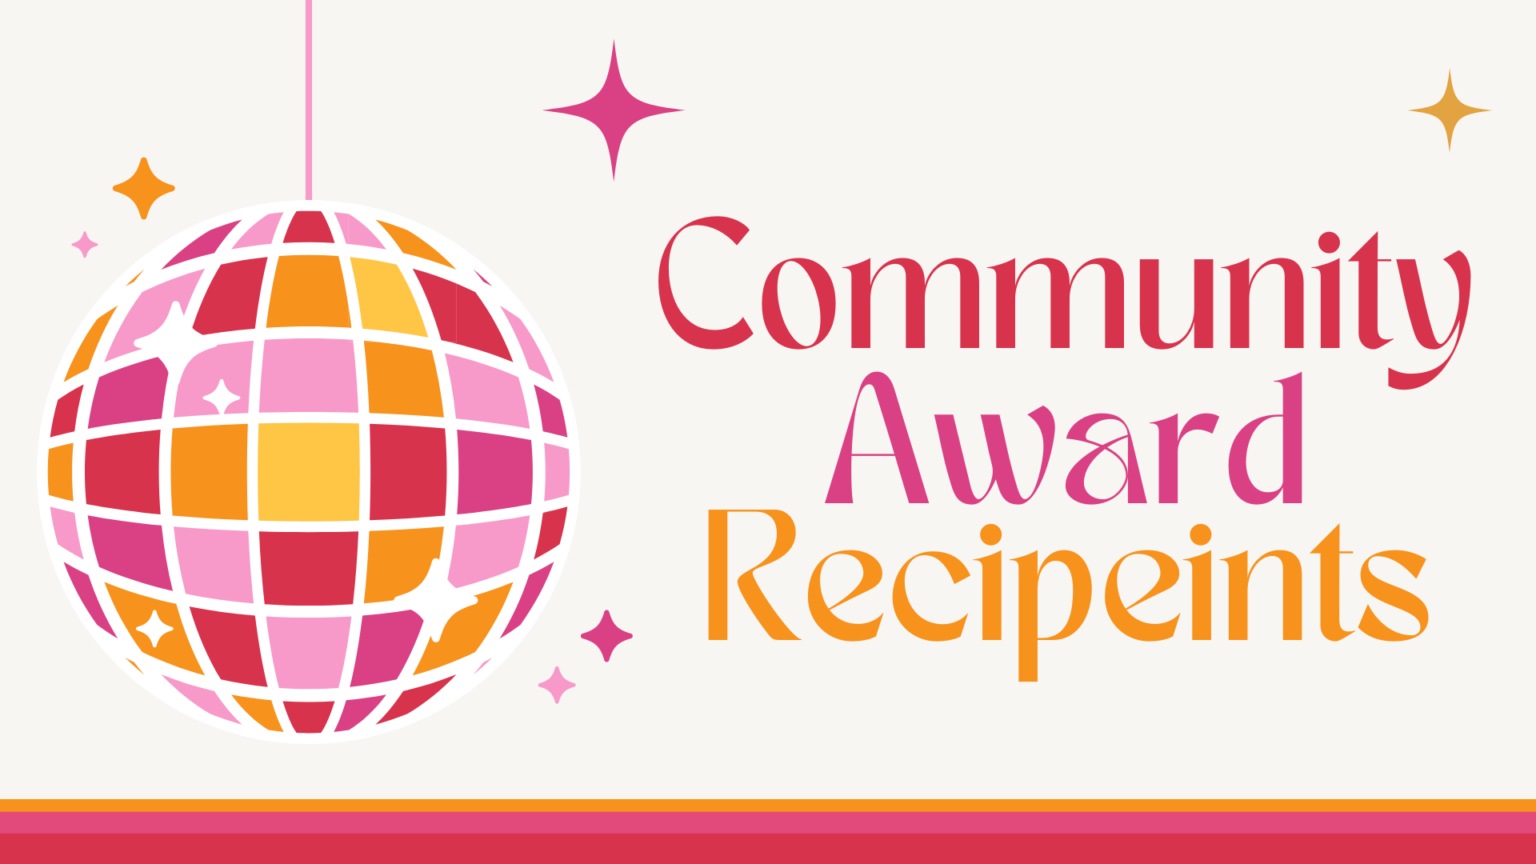 Disco Ball Graphic with text "community award recipients"